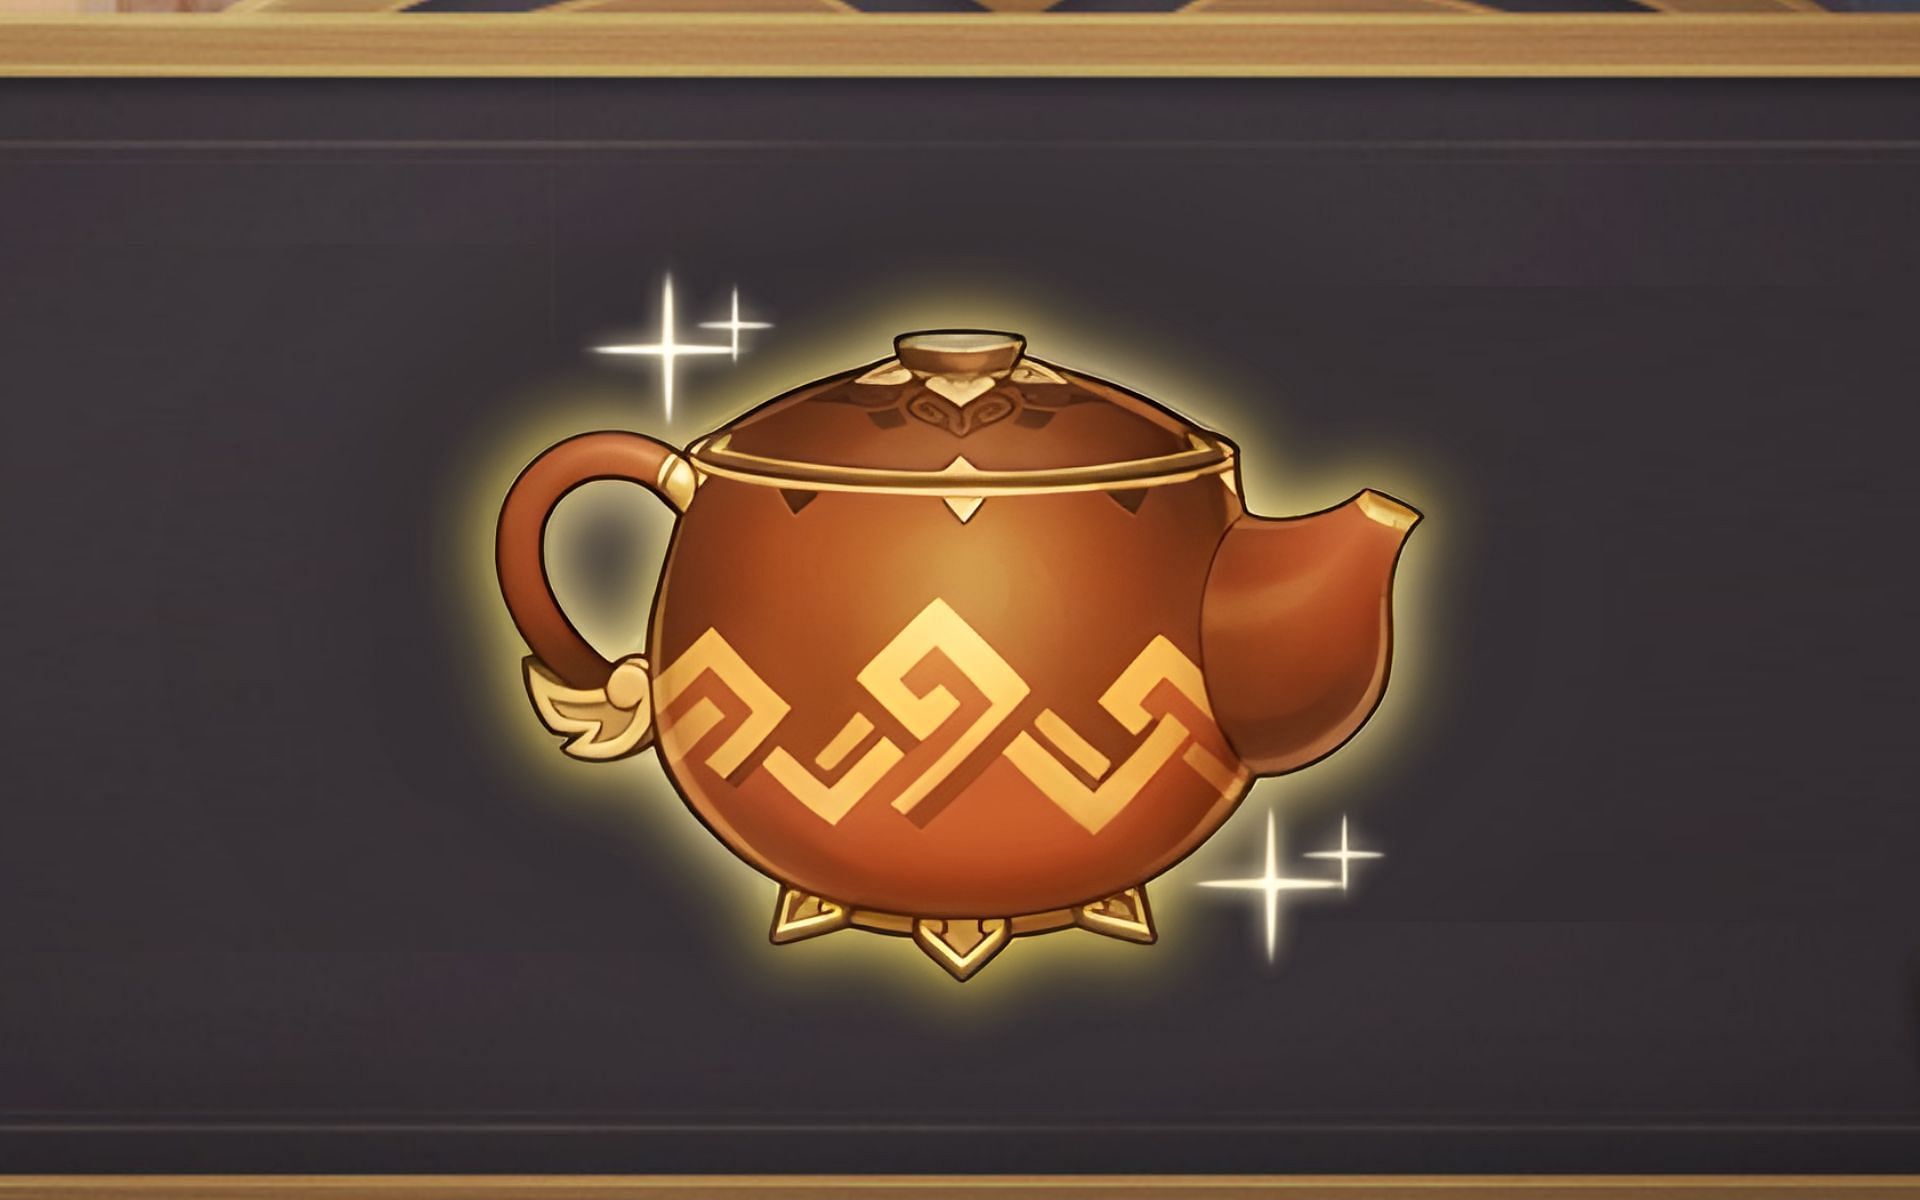 Teapot Maintenance will be over by May 31, 2022 (Image via miHoYo)